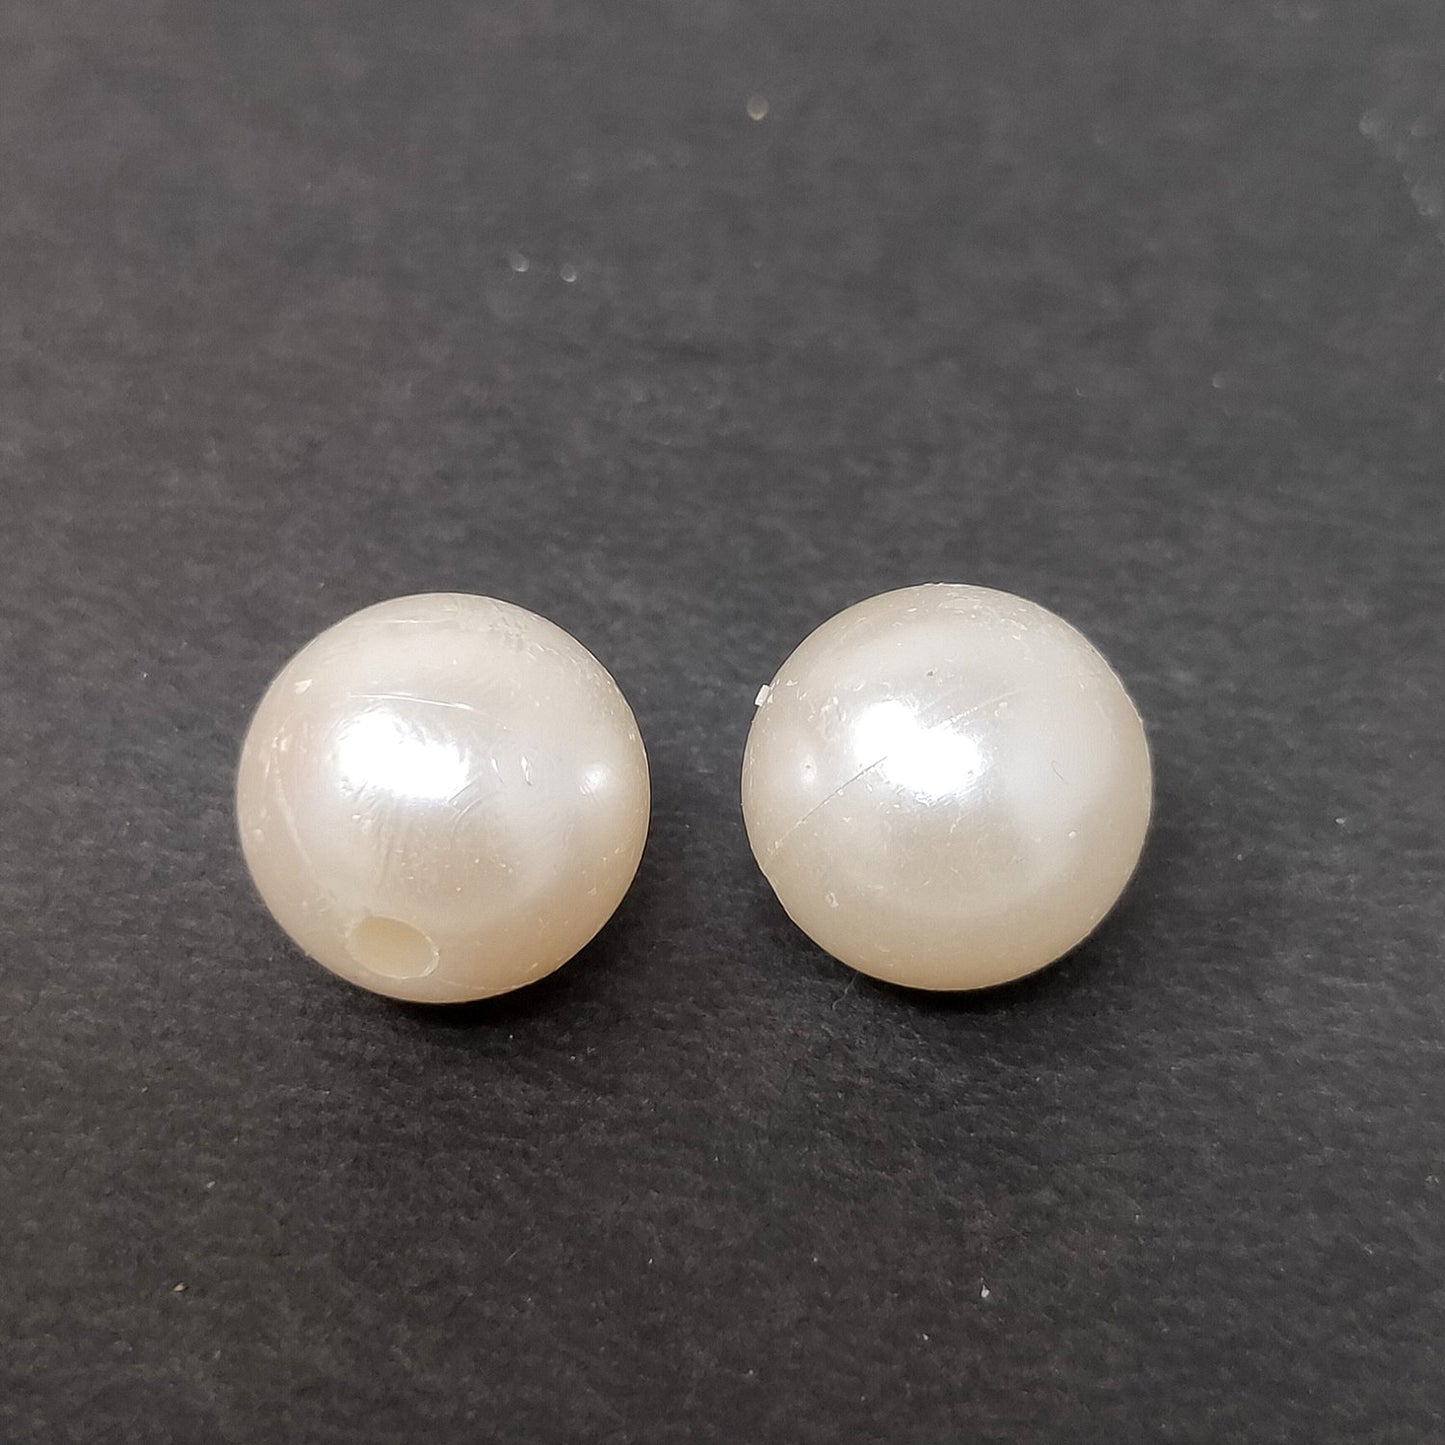 14 mm Off  White Pearl Beads for Jewellery Making and Decoration (10 Beads) - 96-20